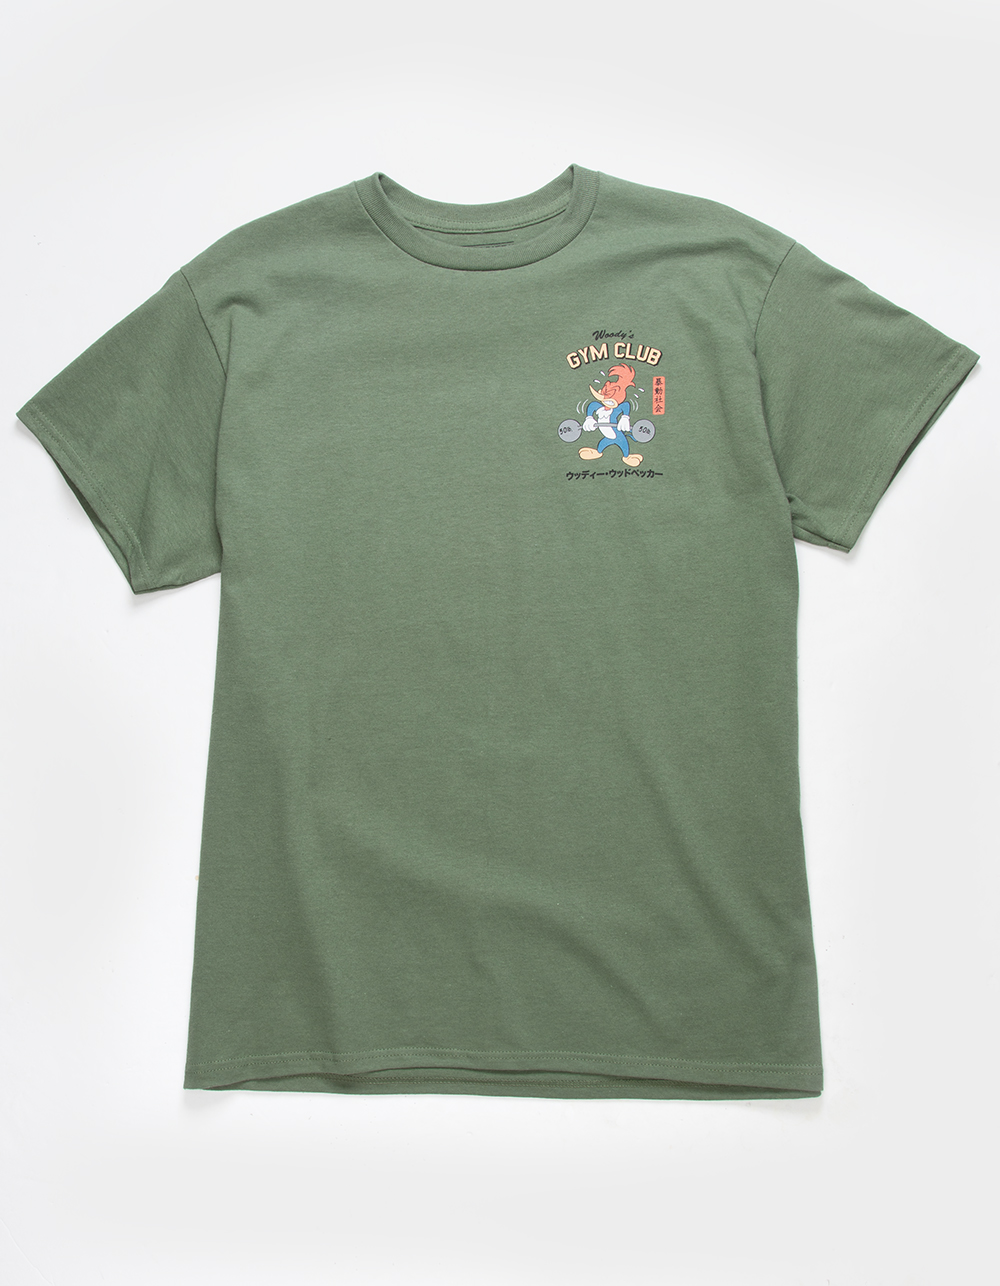 RIOT SOCIETY Woody's Gym Club Mens Tee - MILITARY | Tillys